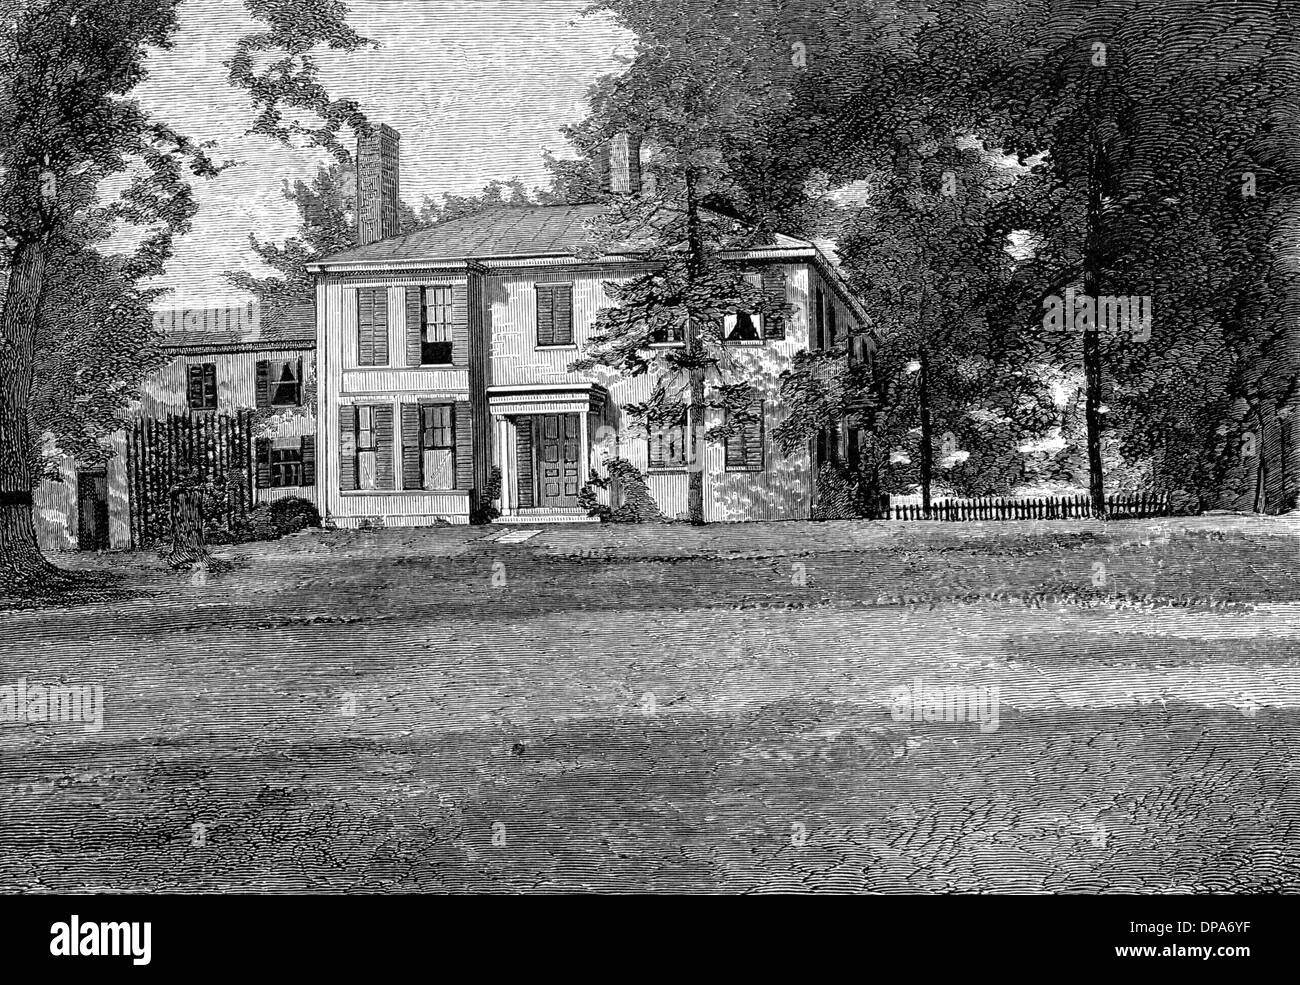 Concord massachusetts Black and White Stock Photos & Images - Alamy